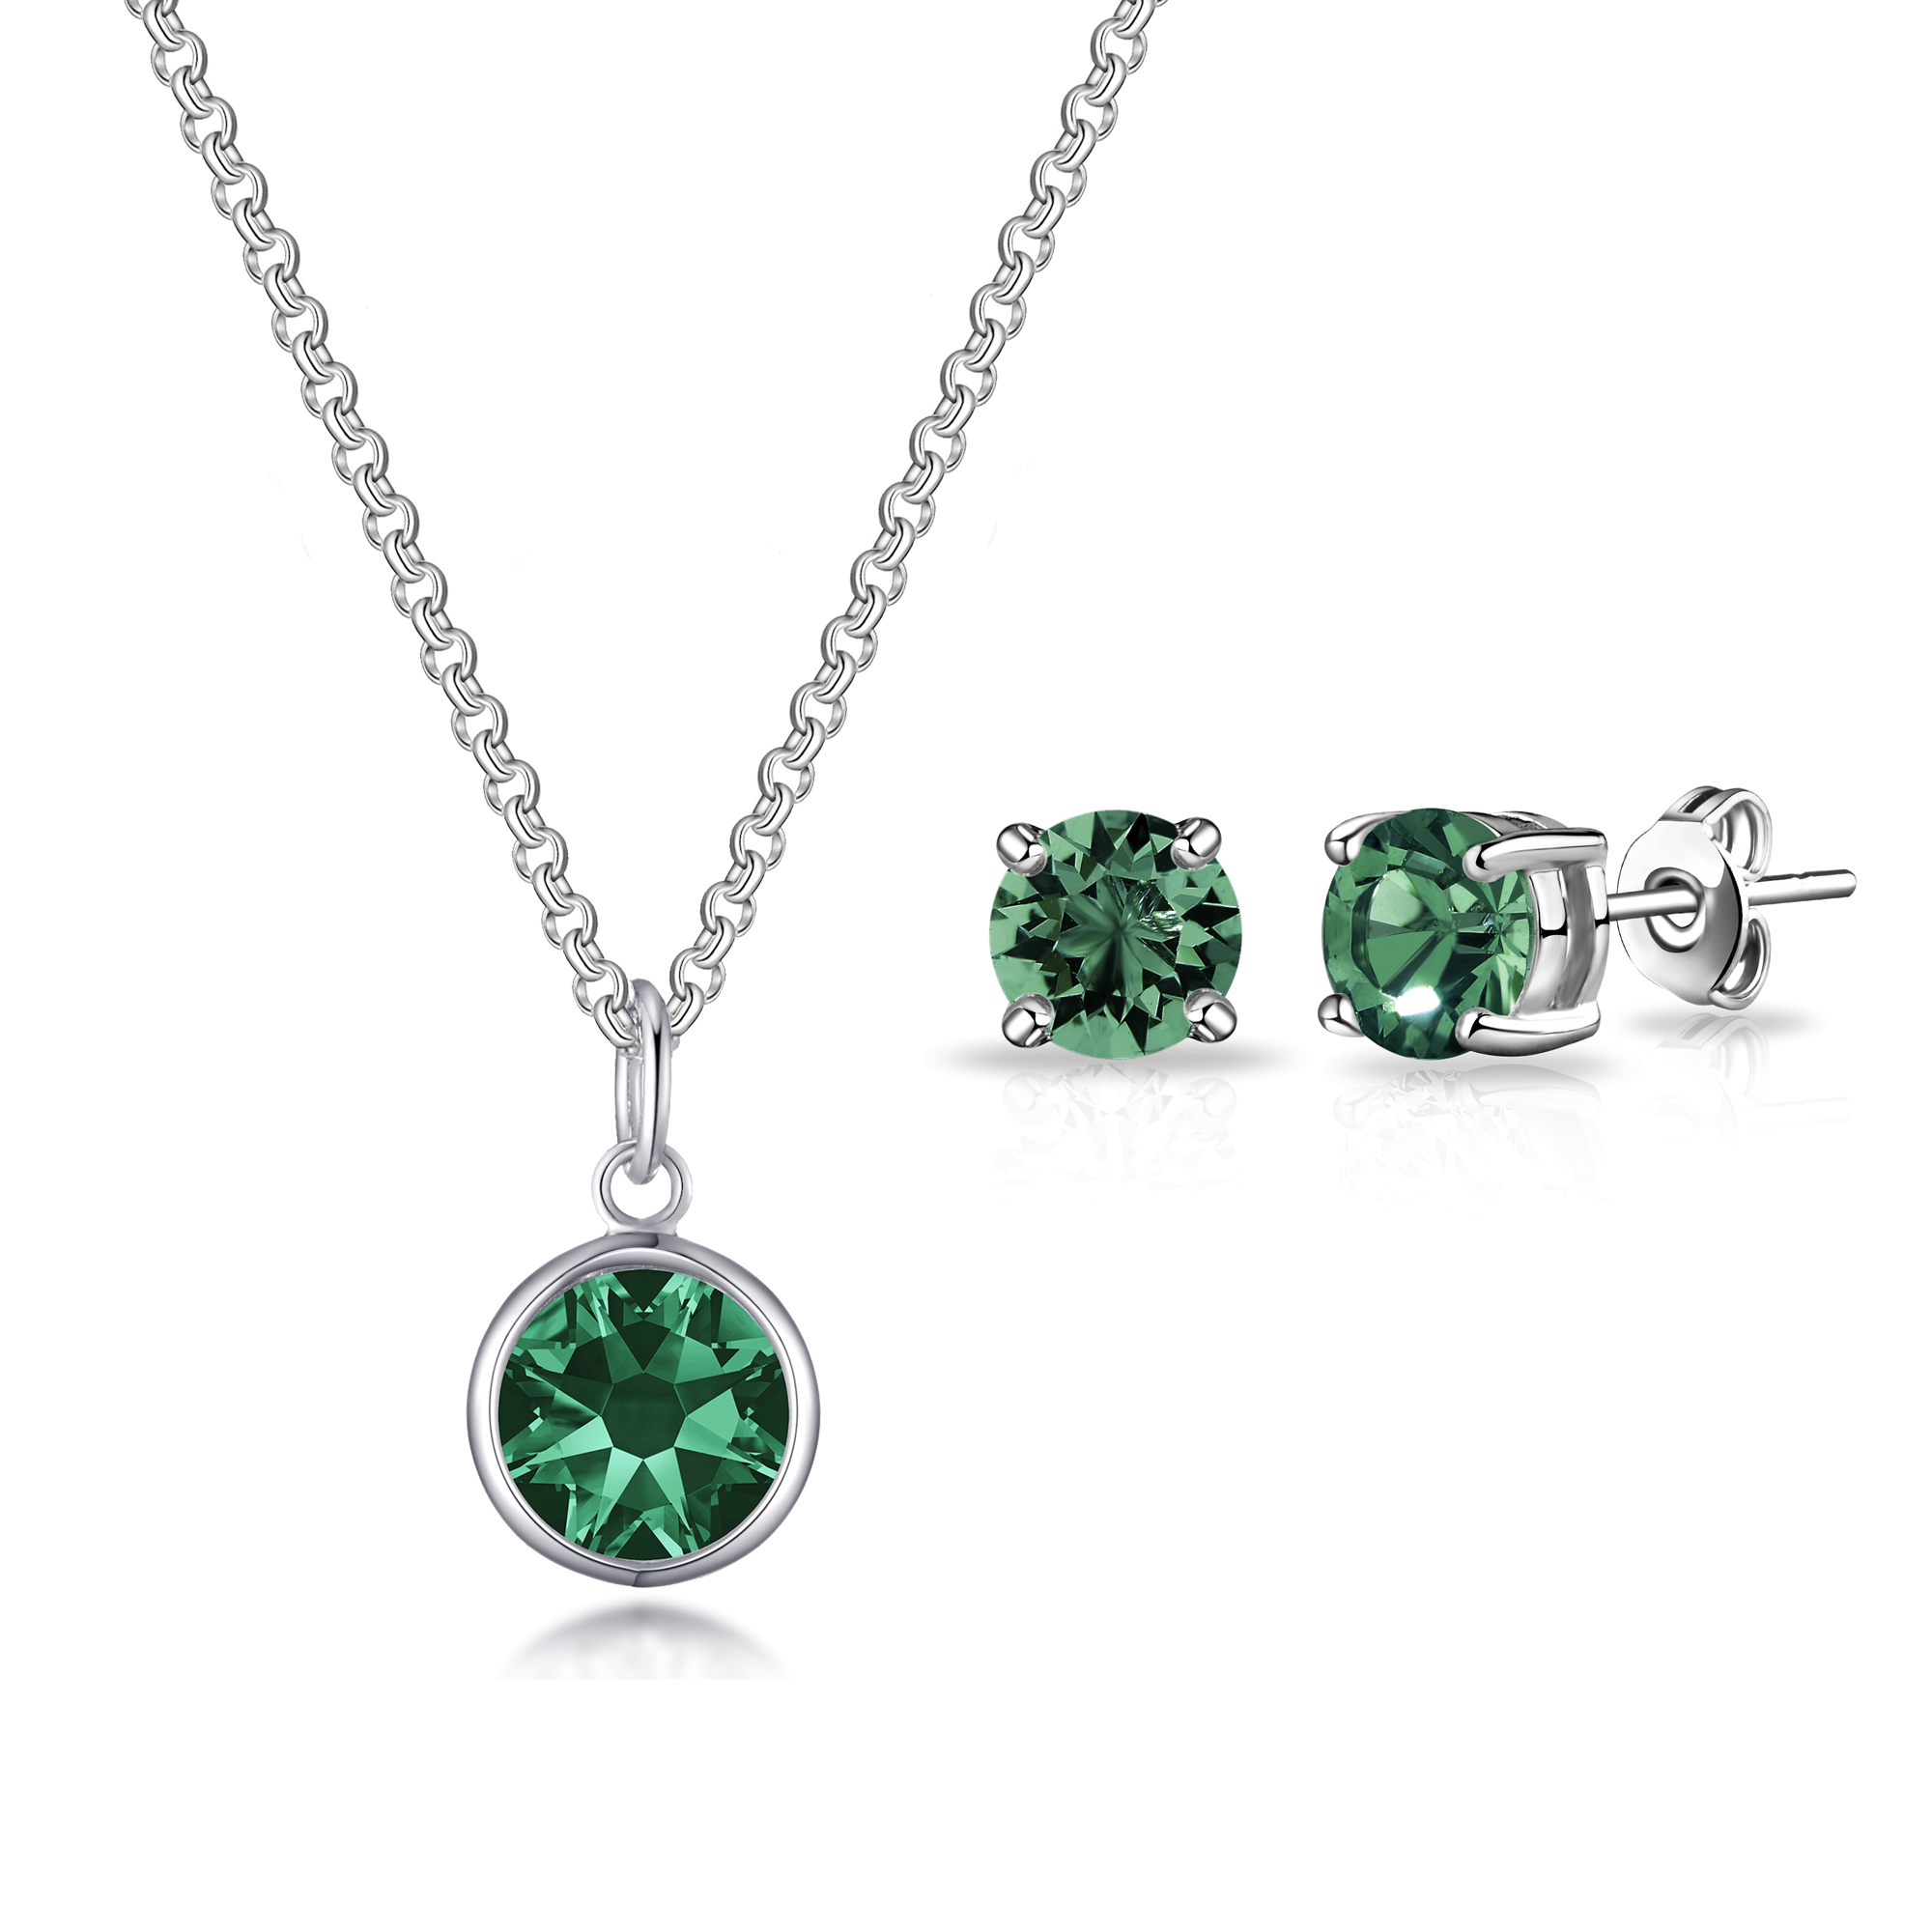 May (Emerald) Birthstone Necklace & Earrings Set Created with Zircondia® Crystals